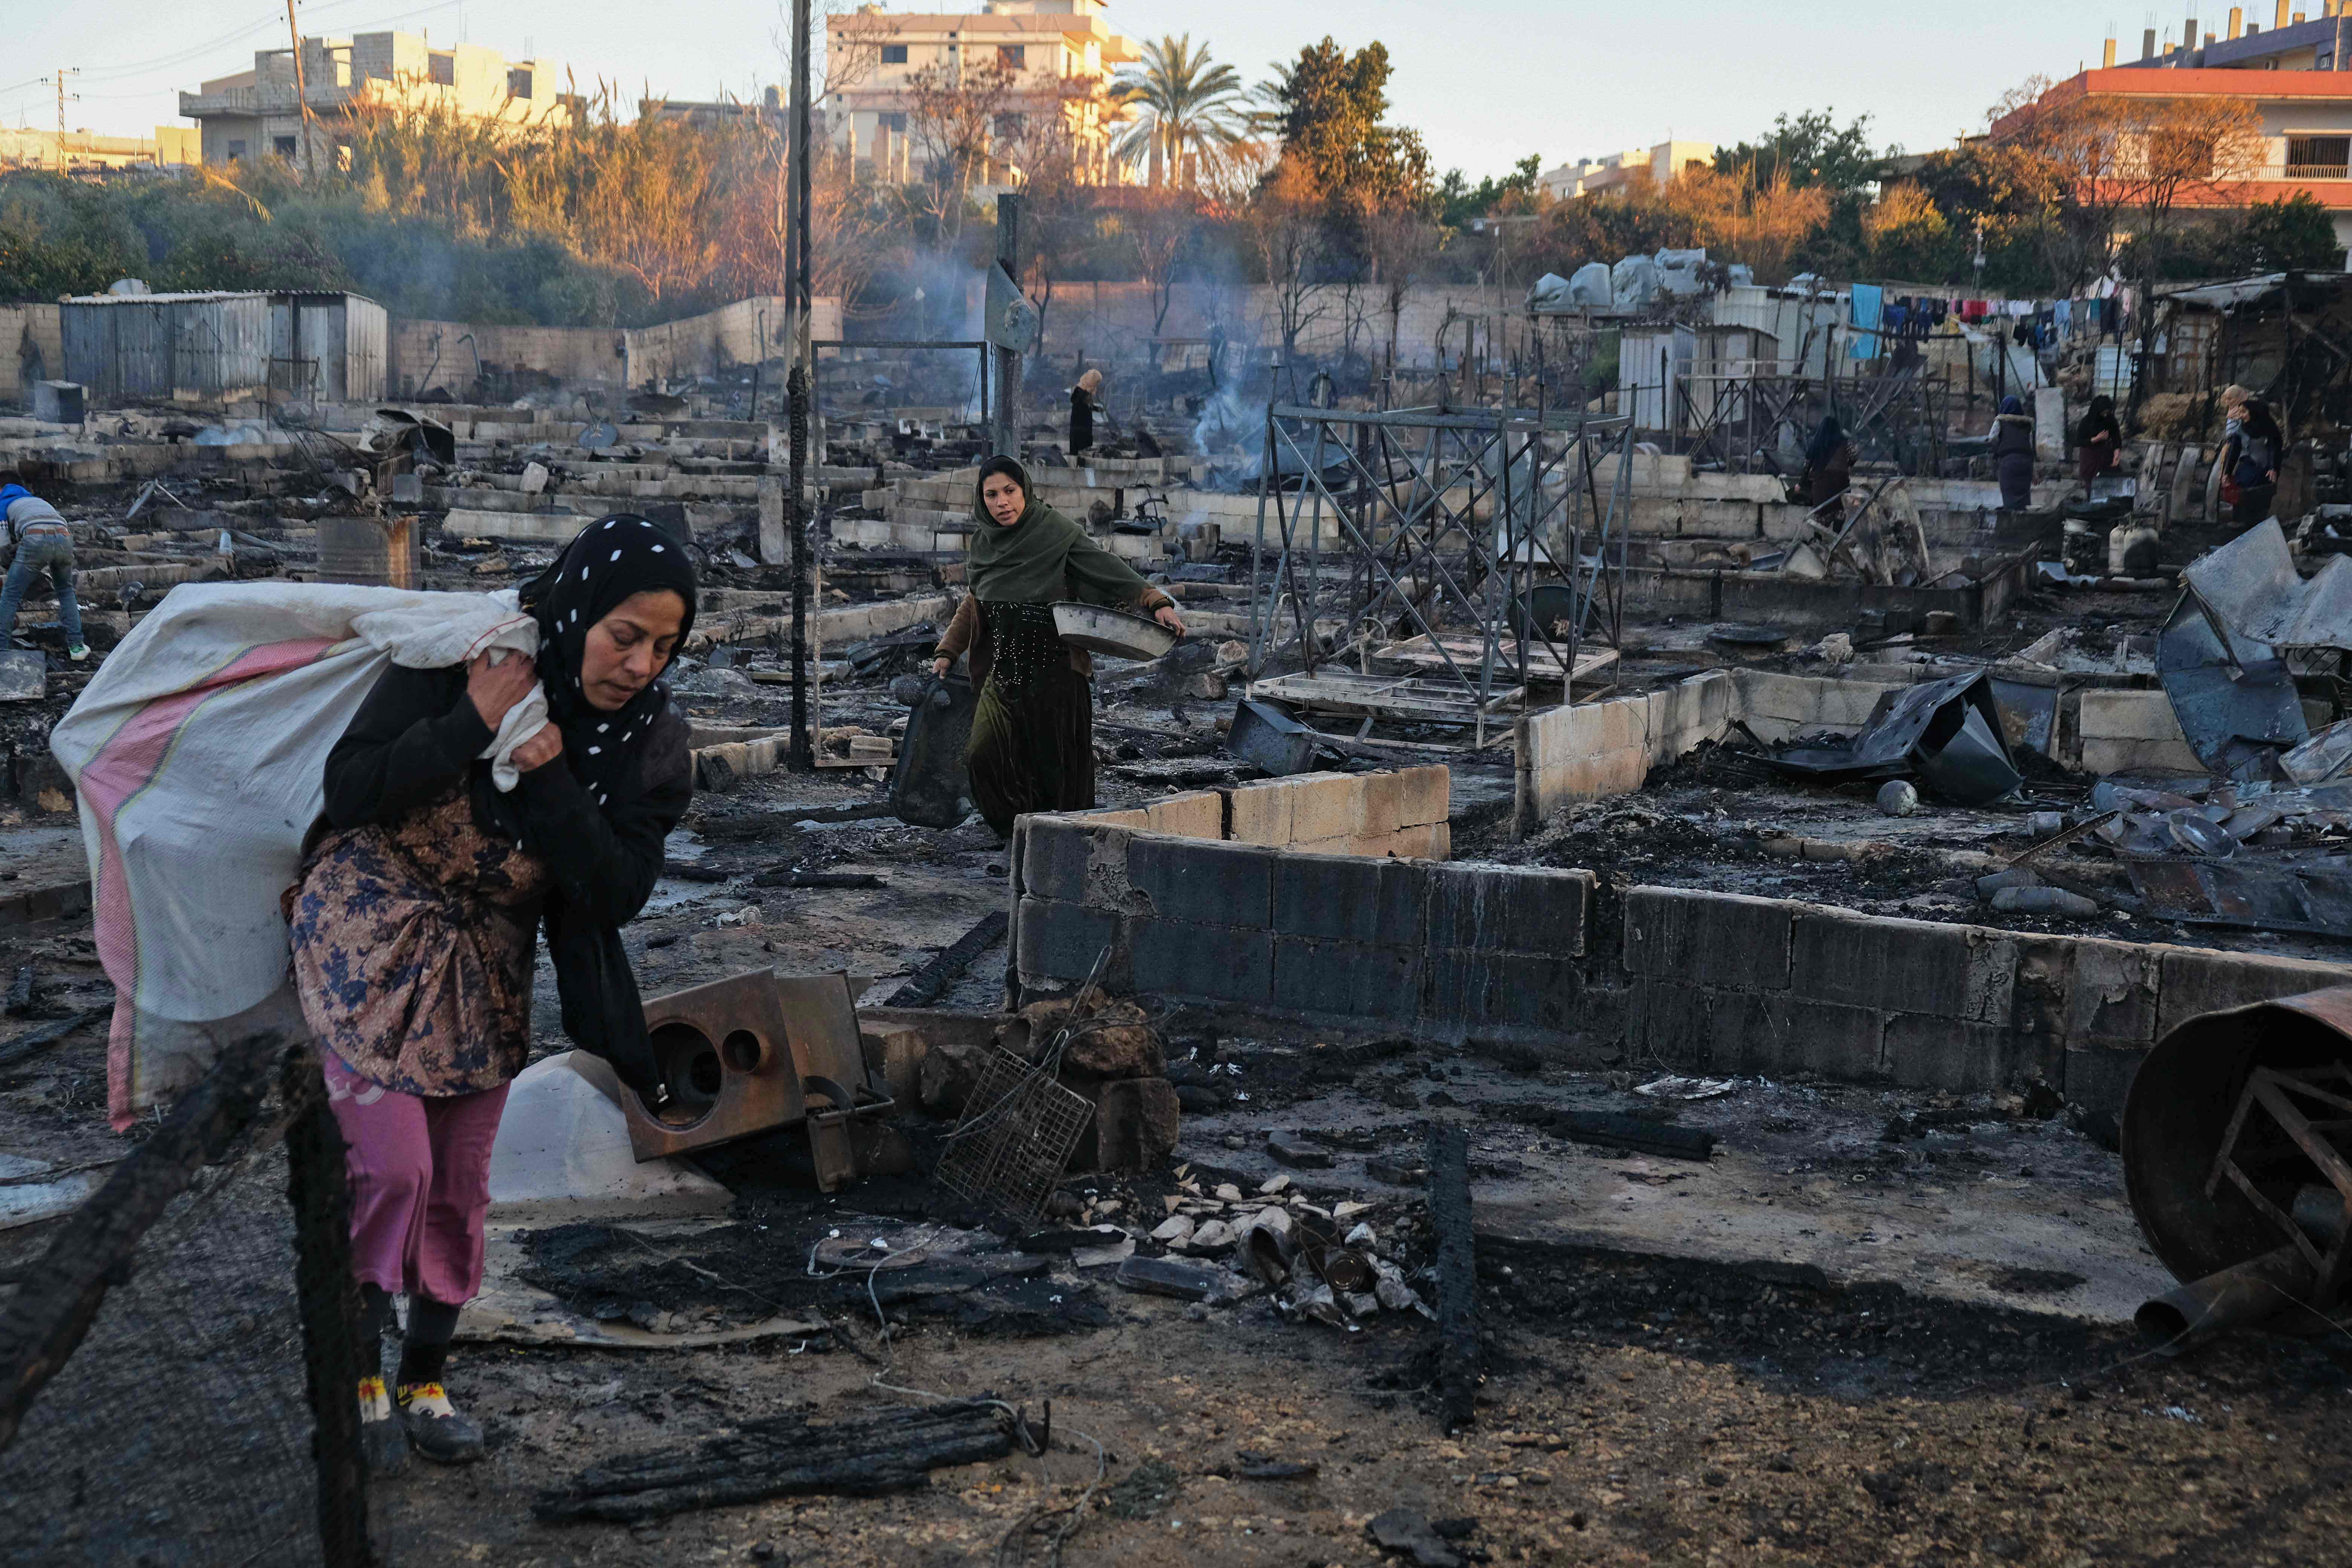 Syrian refugees salvage belongings from the wreckage of their shelters at a camp set on fire overnight in the northern Lebanese town of Bhanine. Credit: AFP Photo